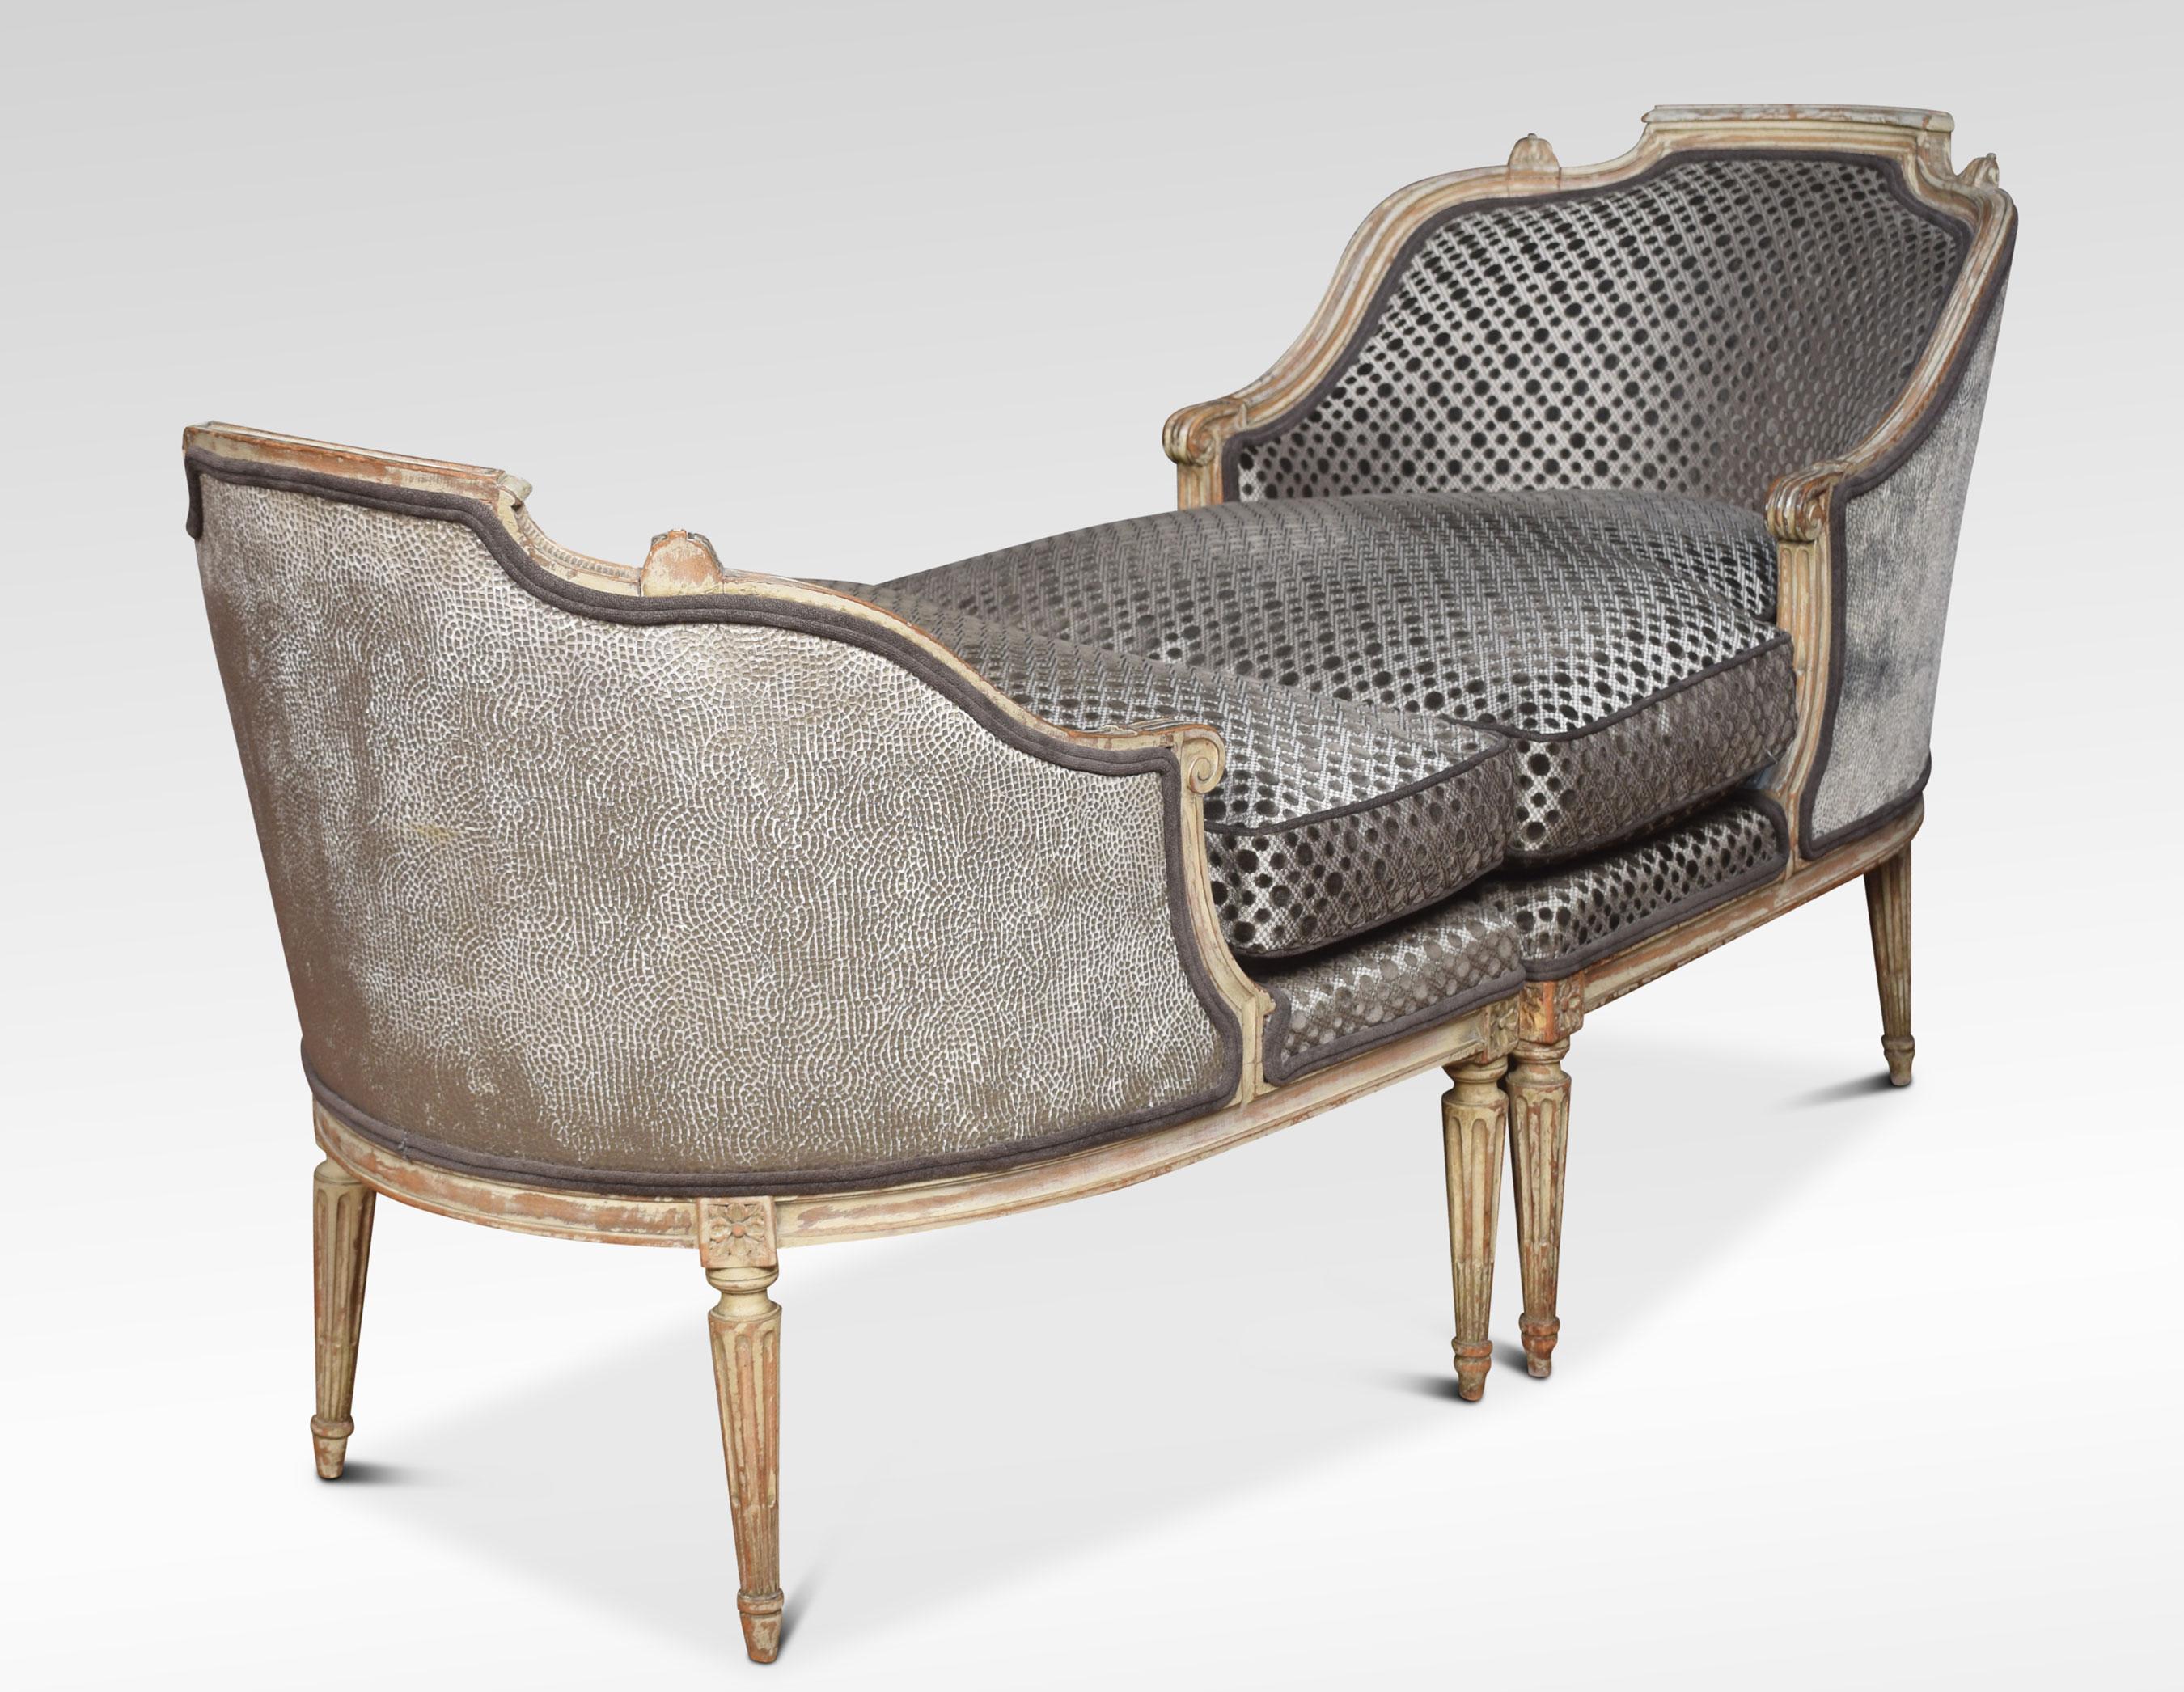 Louis XV style Duchesse Brisee, the moulded frame with original paint recovered in modern grey fabric, raised up on redded fluted legs.
Dimensions
Height 34.5 inches height to seat 23 inches
Width 73 inches
Depth 26 inches.